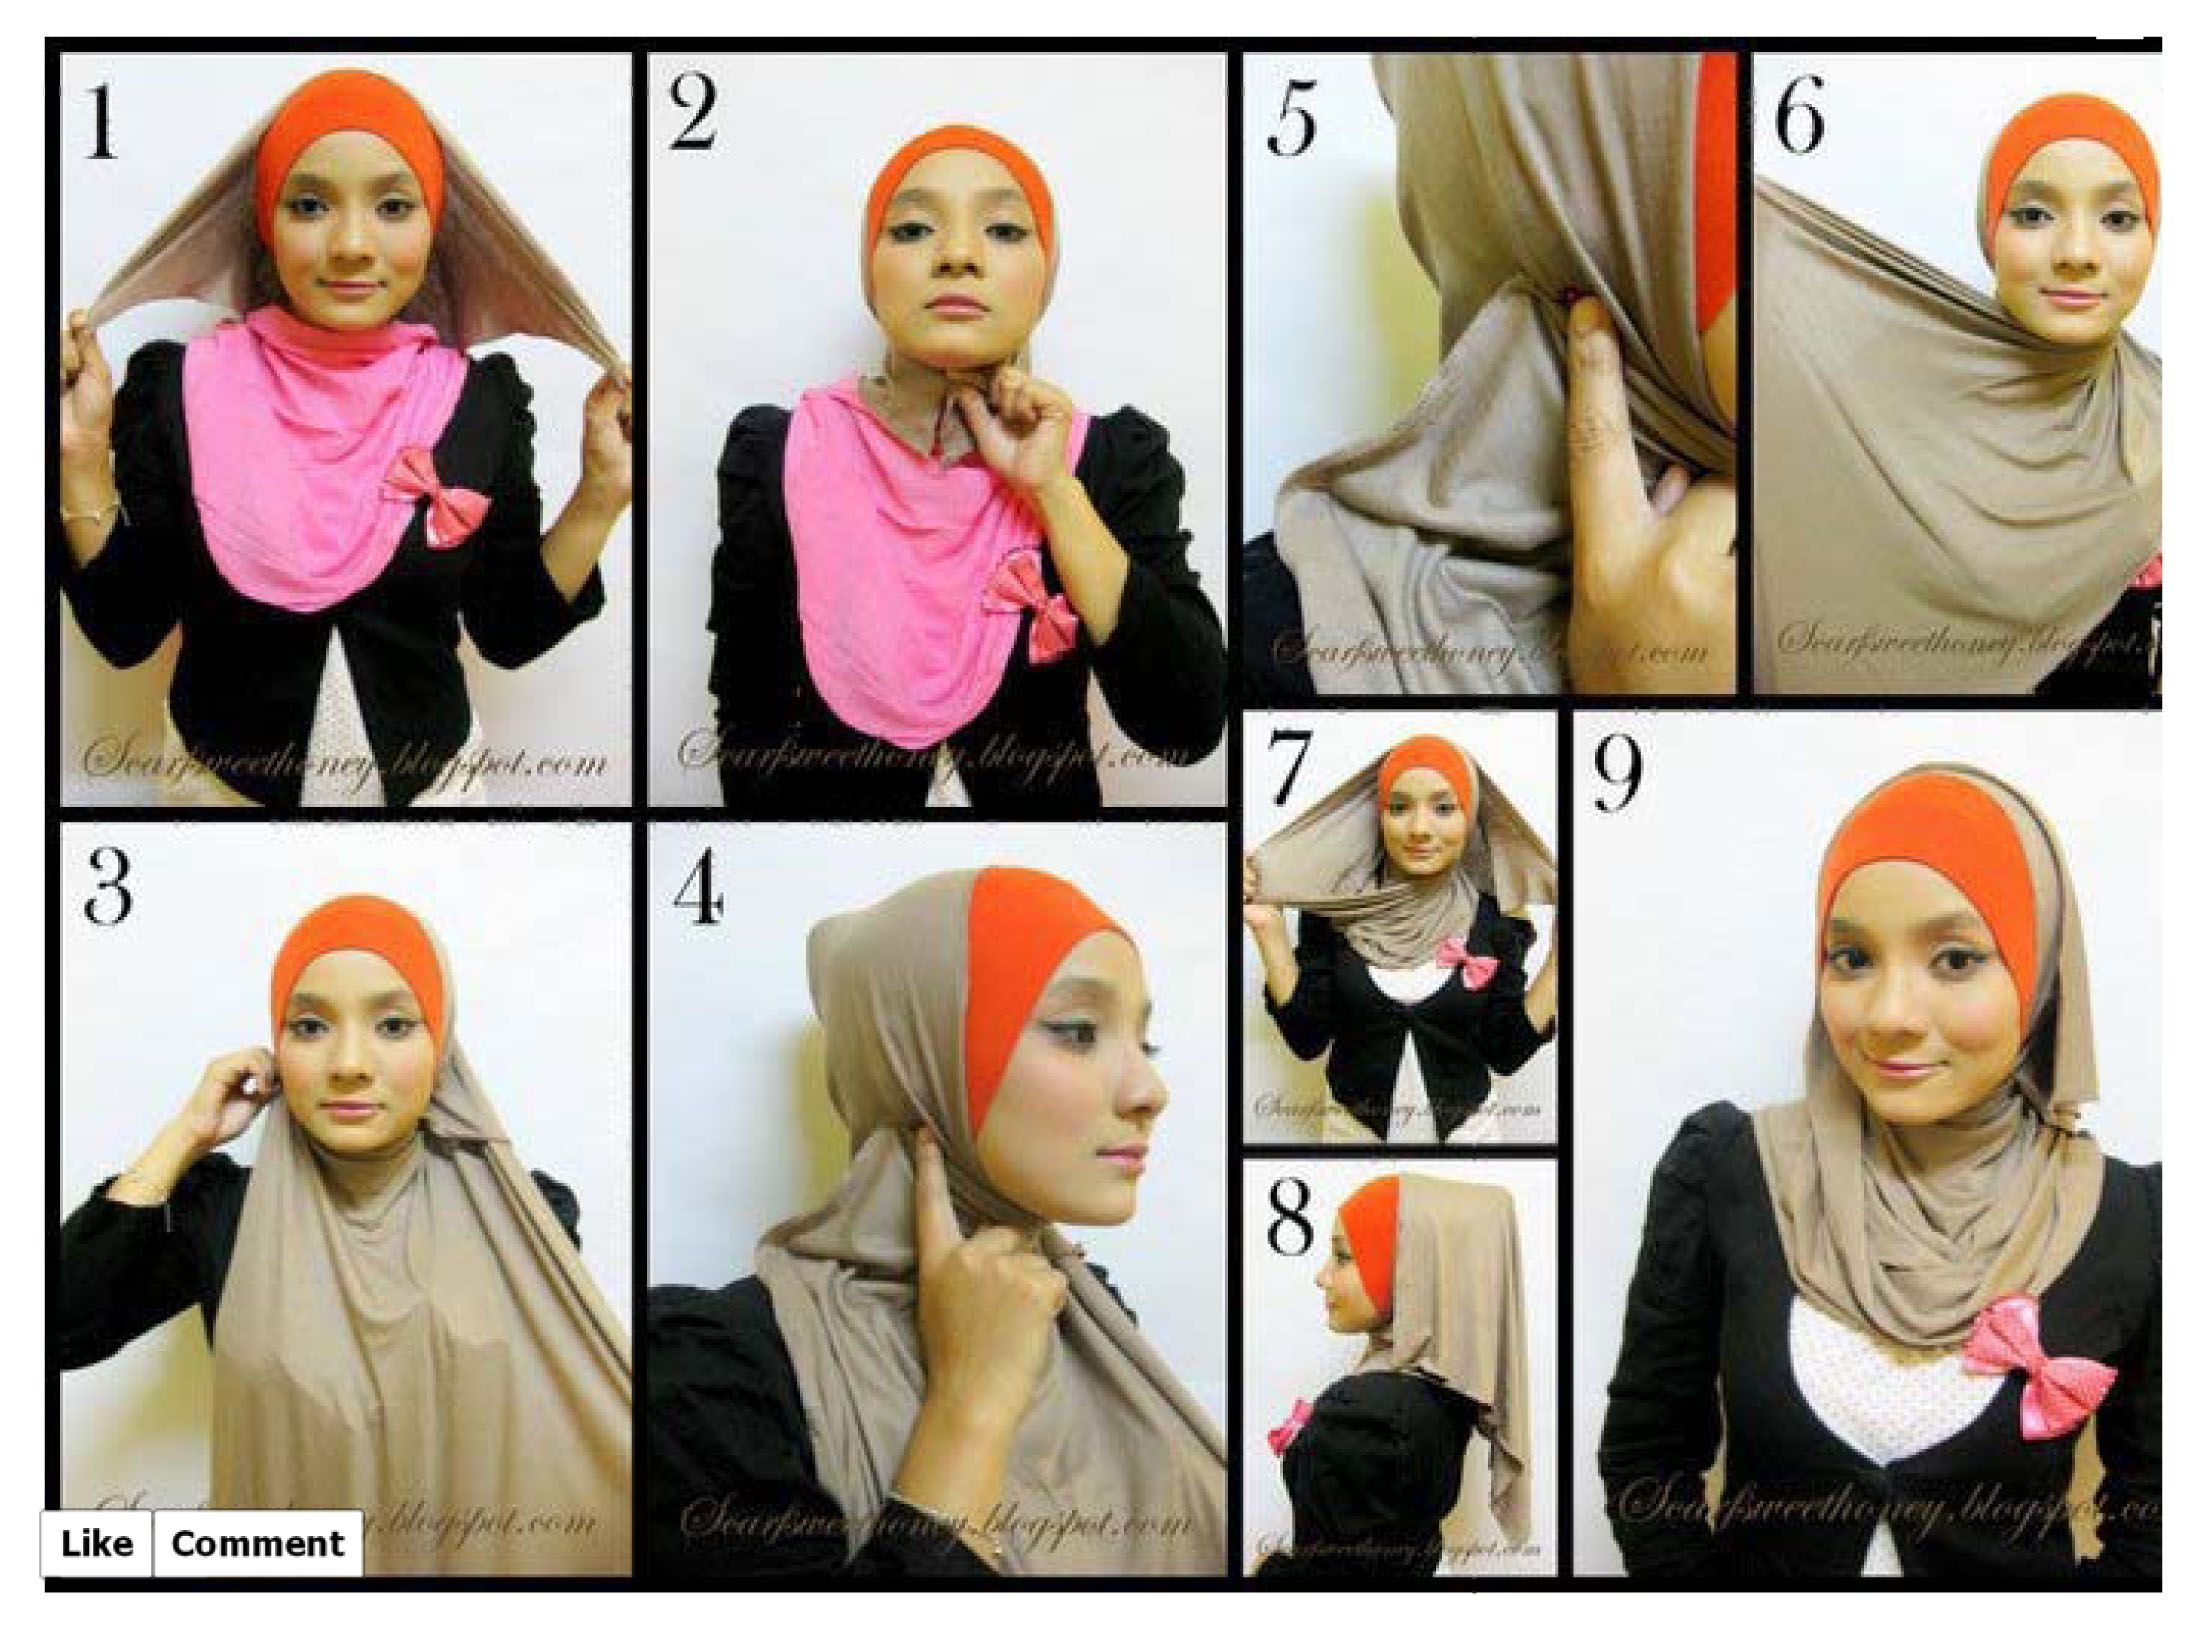 Hijab Style Part One  sweetsoursalty